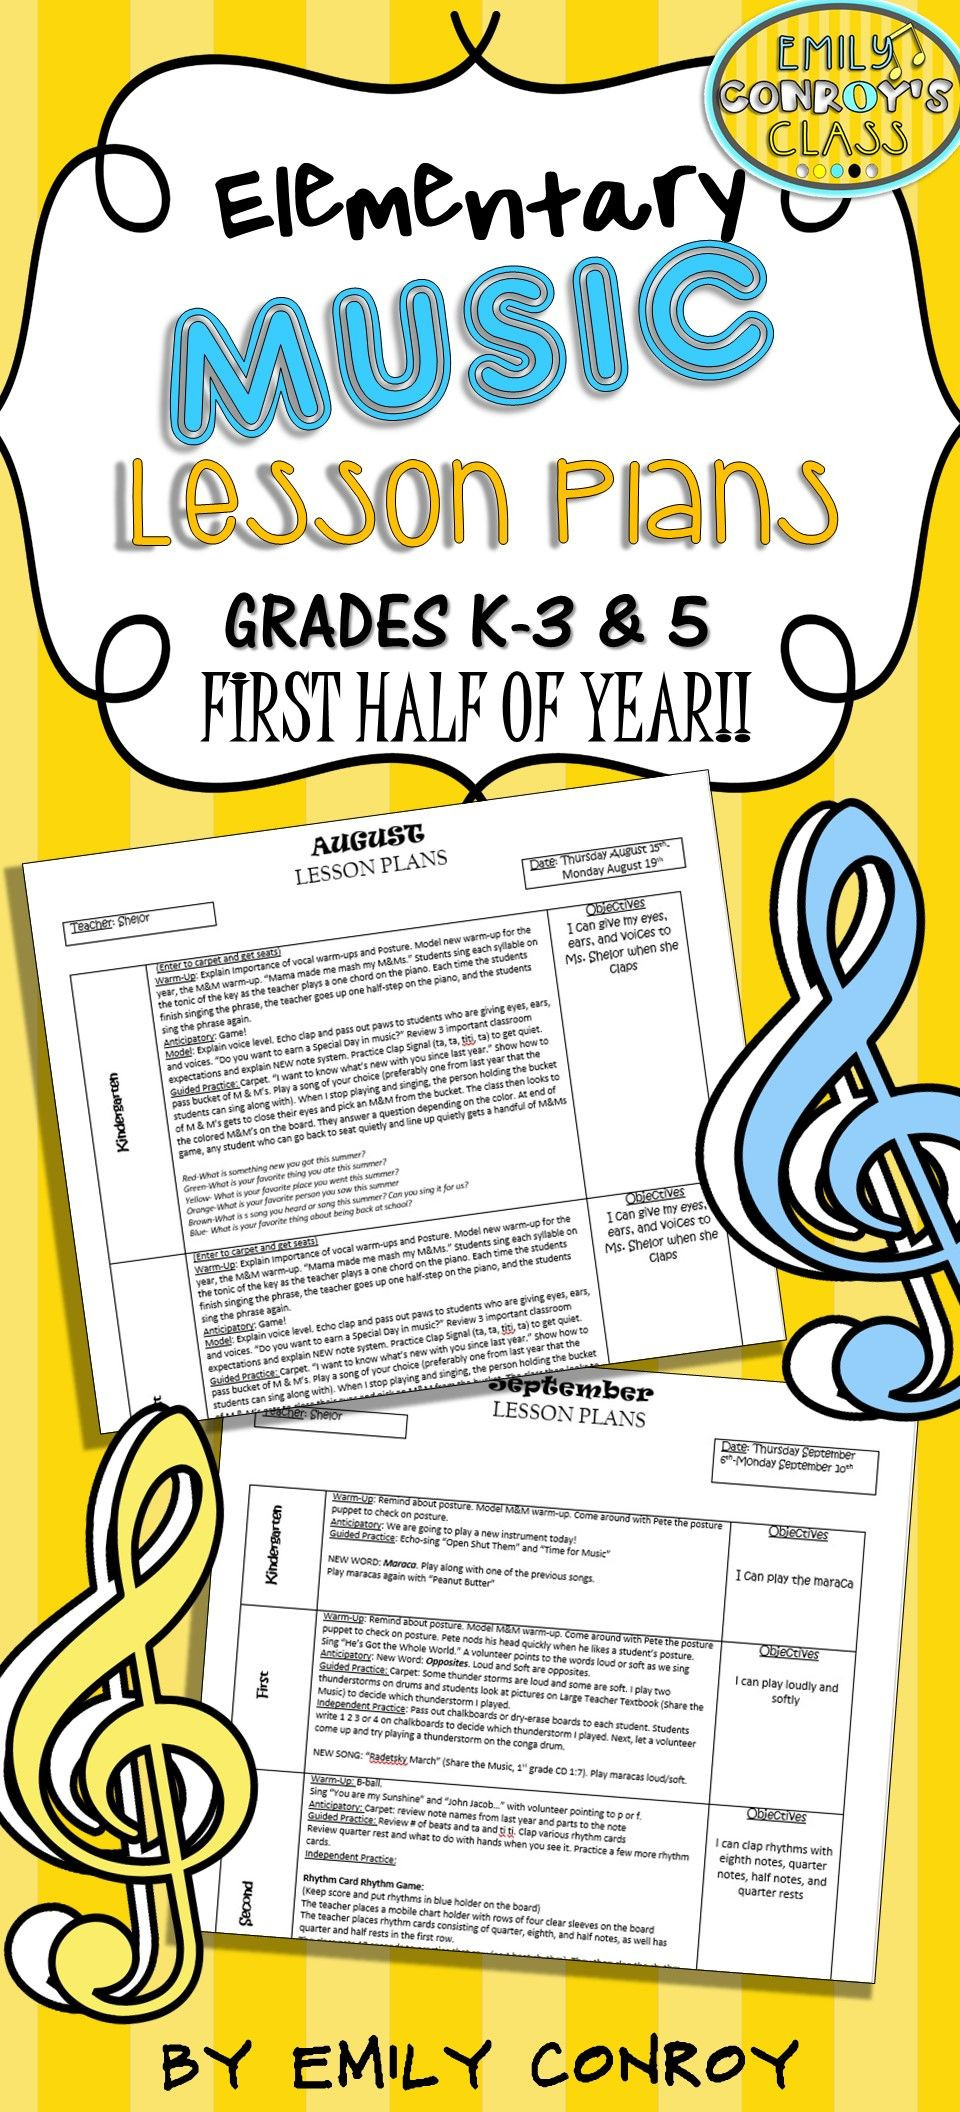 Elementary Music Lesson Plans Elementary Music Lessons Plans these Plans are Creative